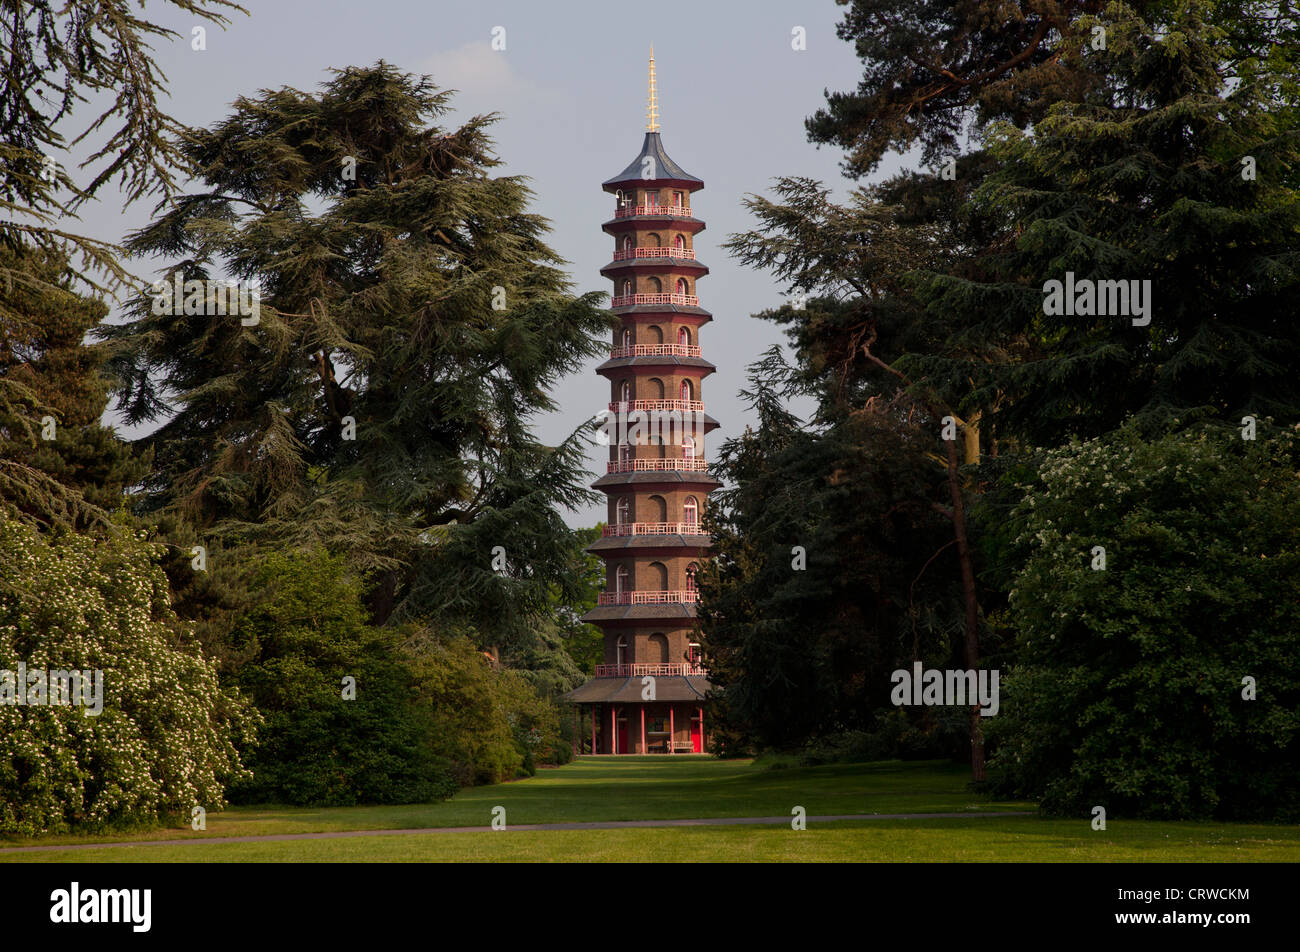 Set among large trees, the 50-metre 10-storey pagoda is the highest structure at Kew Gardens in London in England. Stock Photo